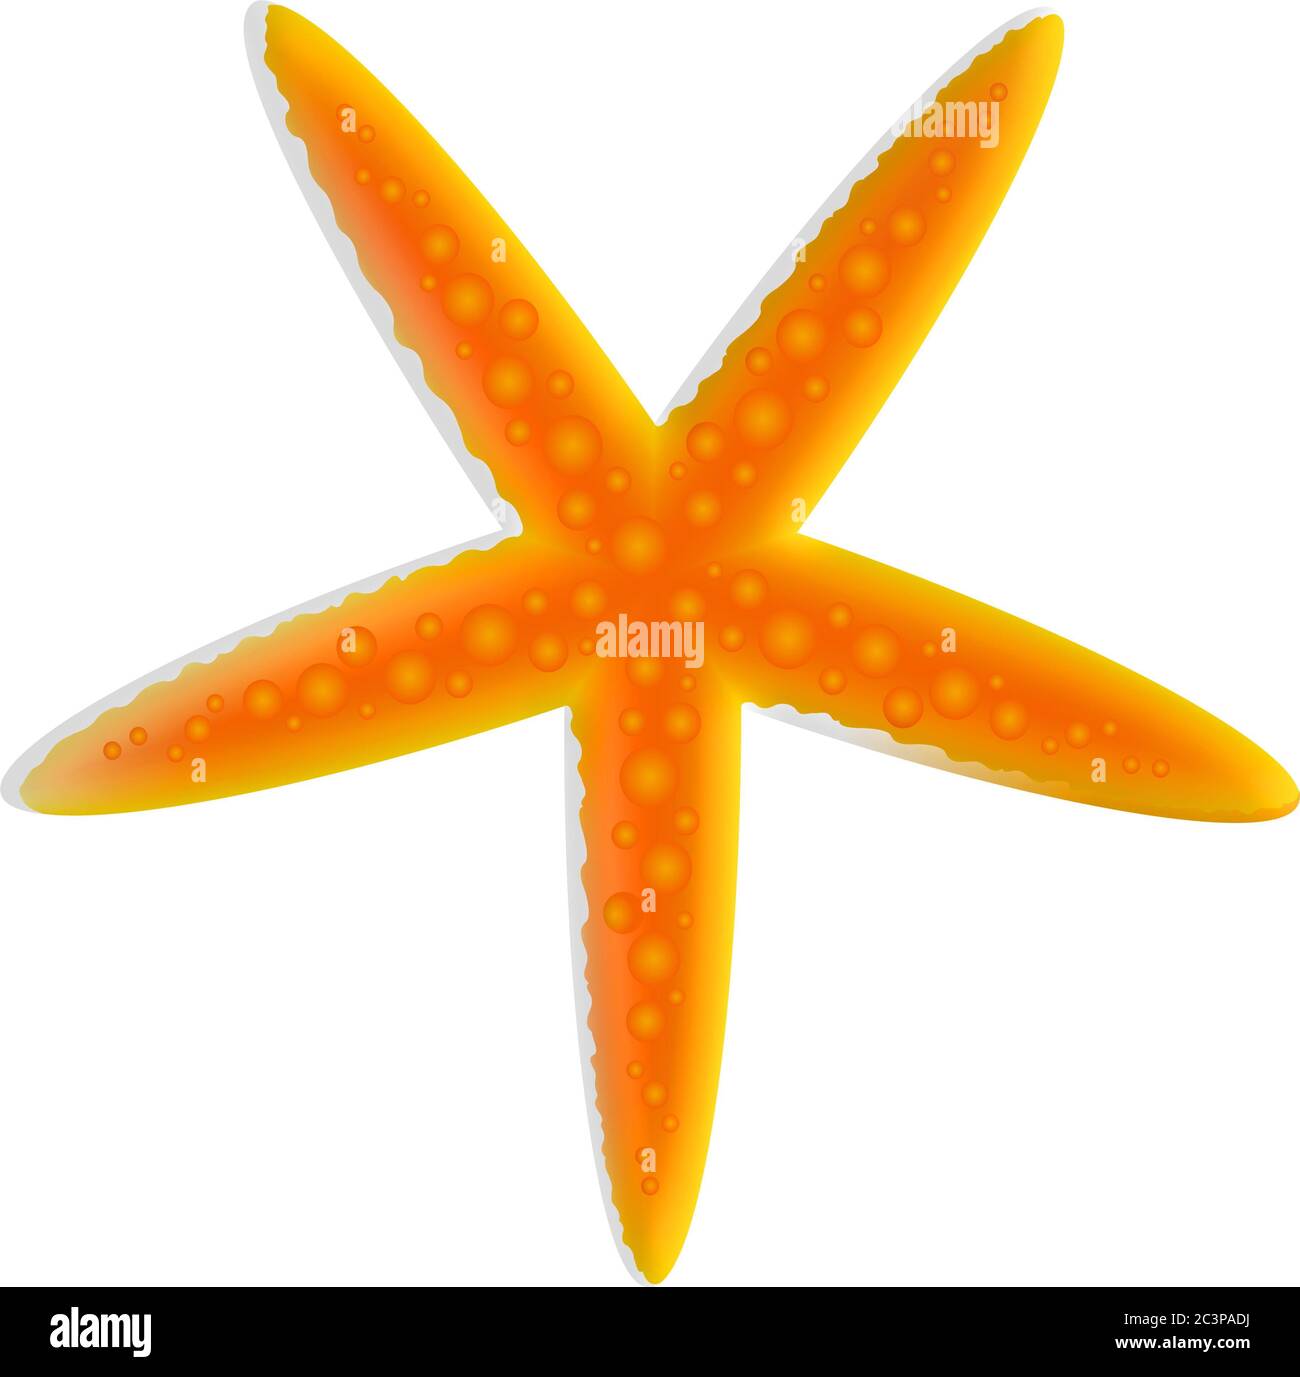 An illustration of an orange starfish isolated on a white background Stock Photo